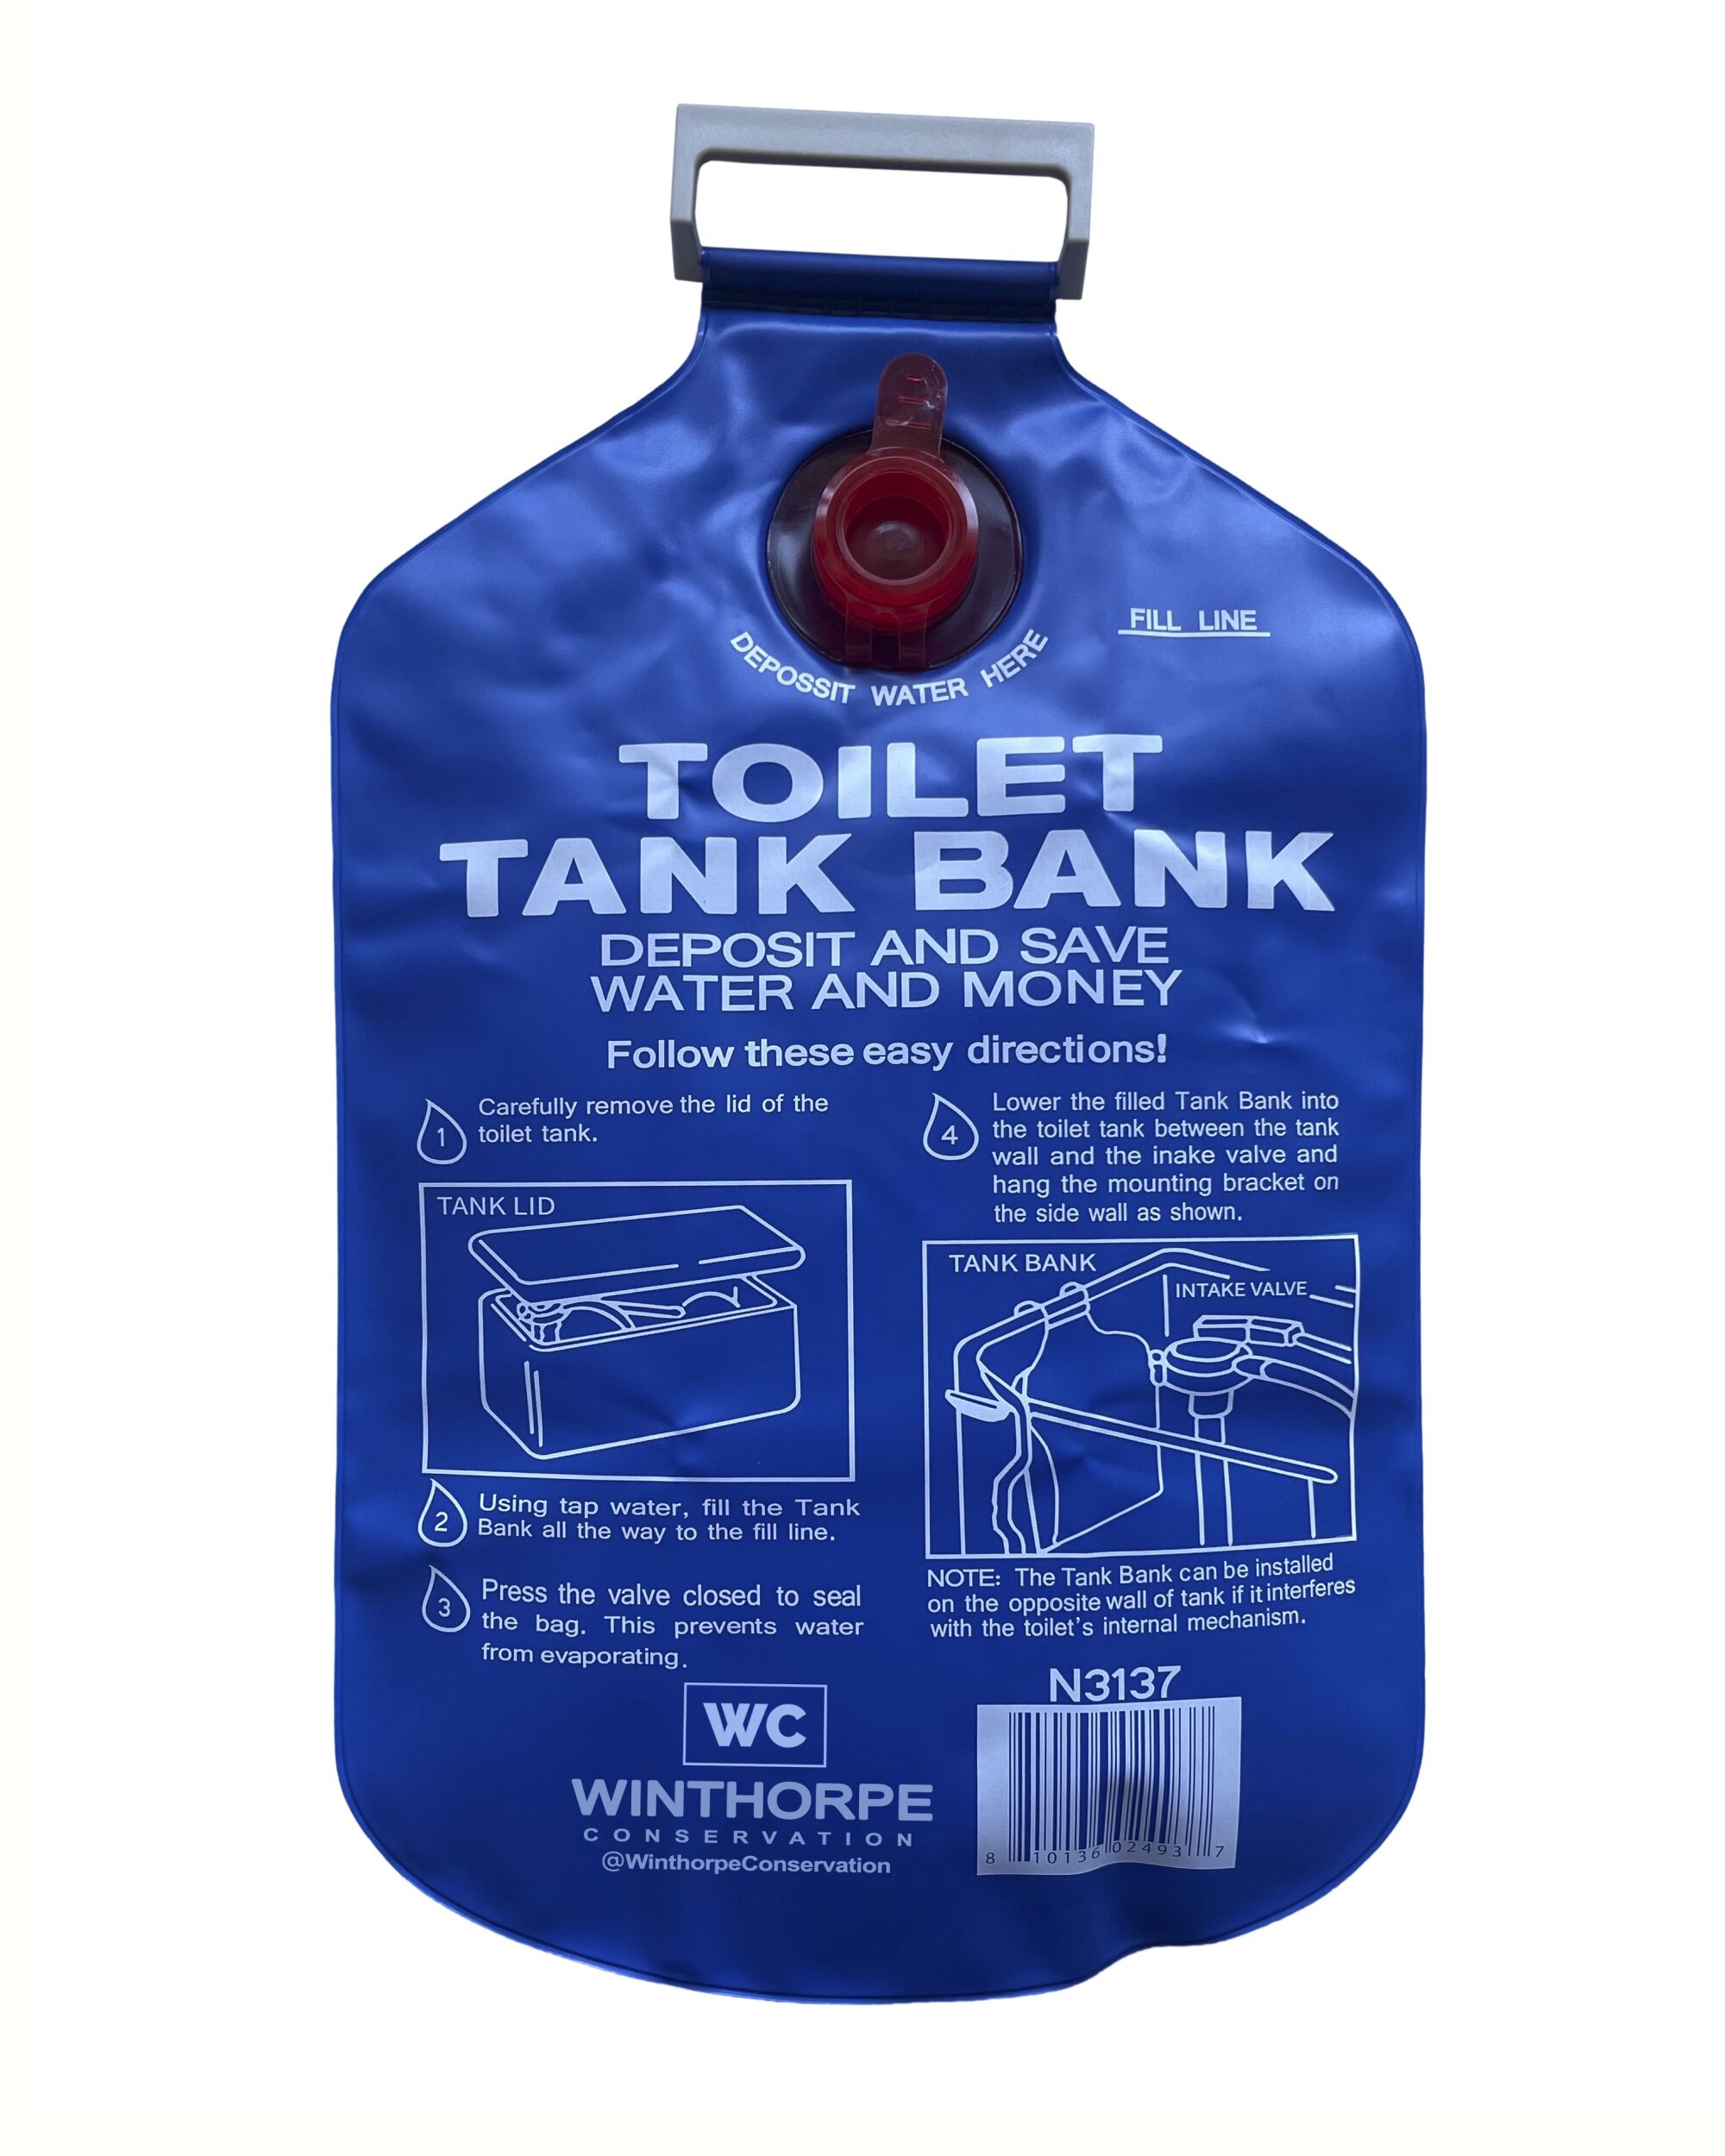 A water-conserving tank insert - 3 pack from Toilet Tank Bank/Winthorpe Conservation 